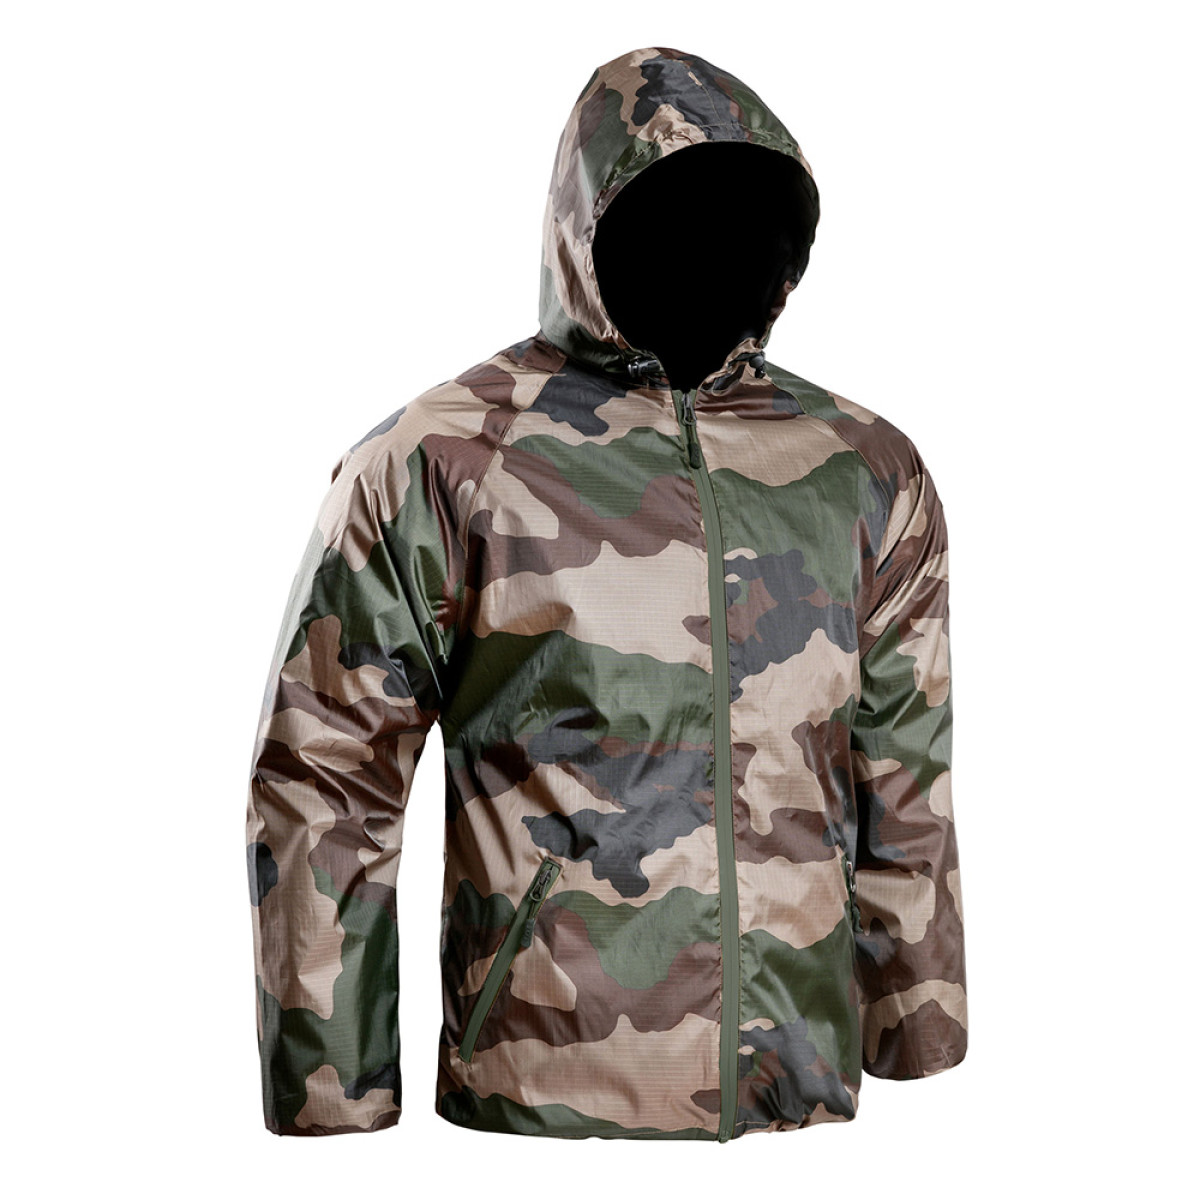 Cagoule Militaire Vert ou Tan A10 Equipment Thermo Performer 0°/+10° - Pro  Army